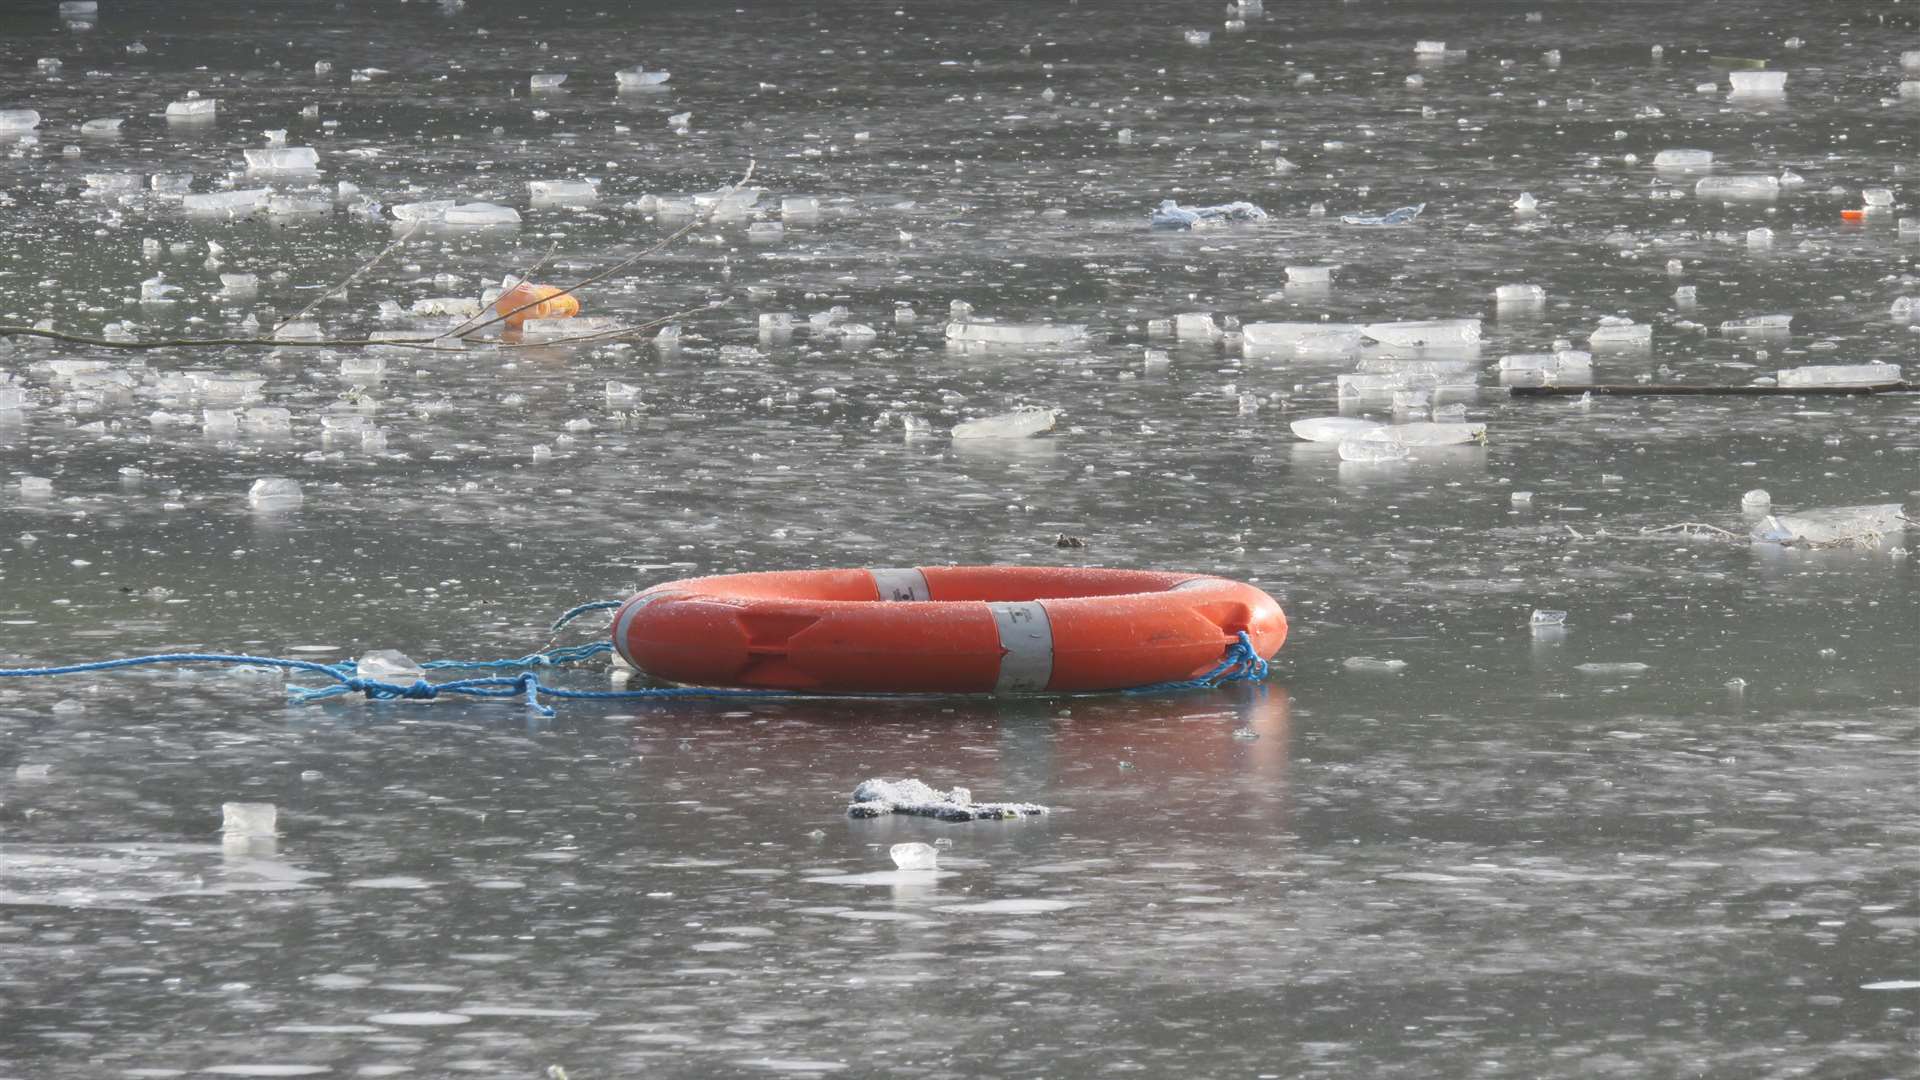 The lifebuoy on the ice. Credit: Andy Clark.